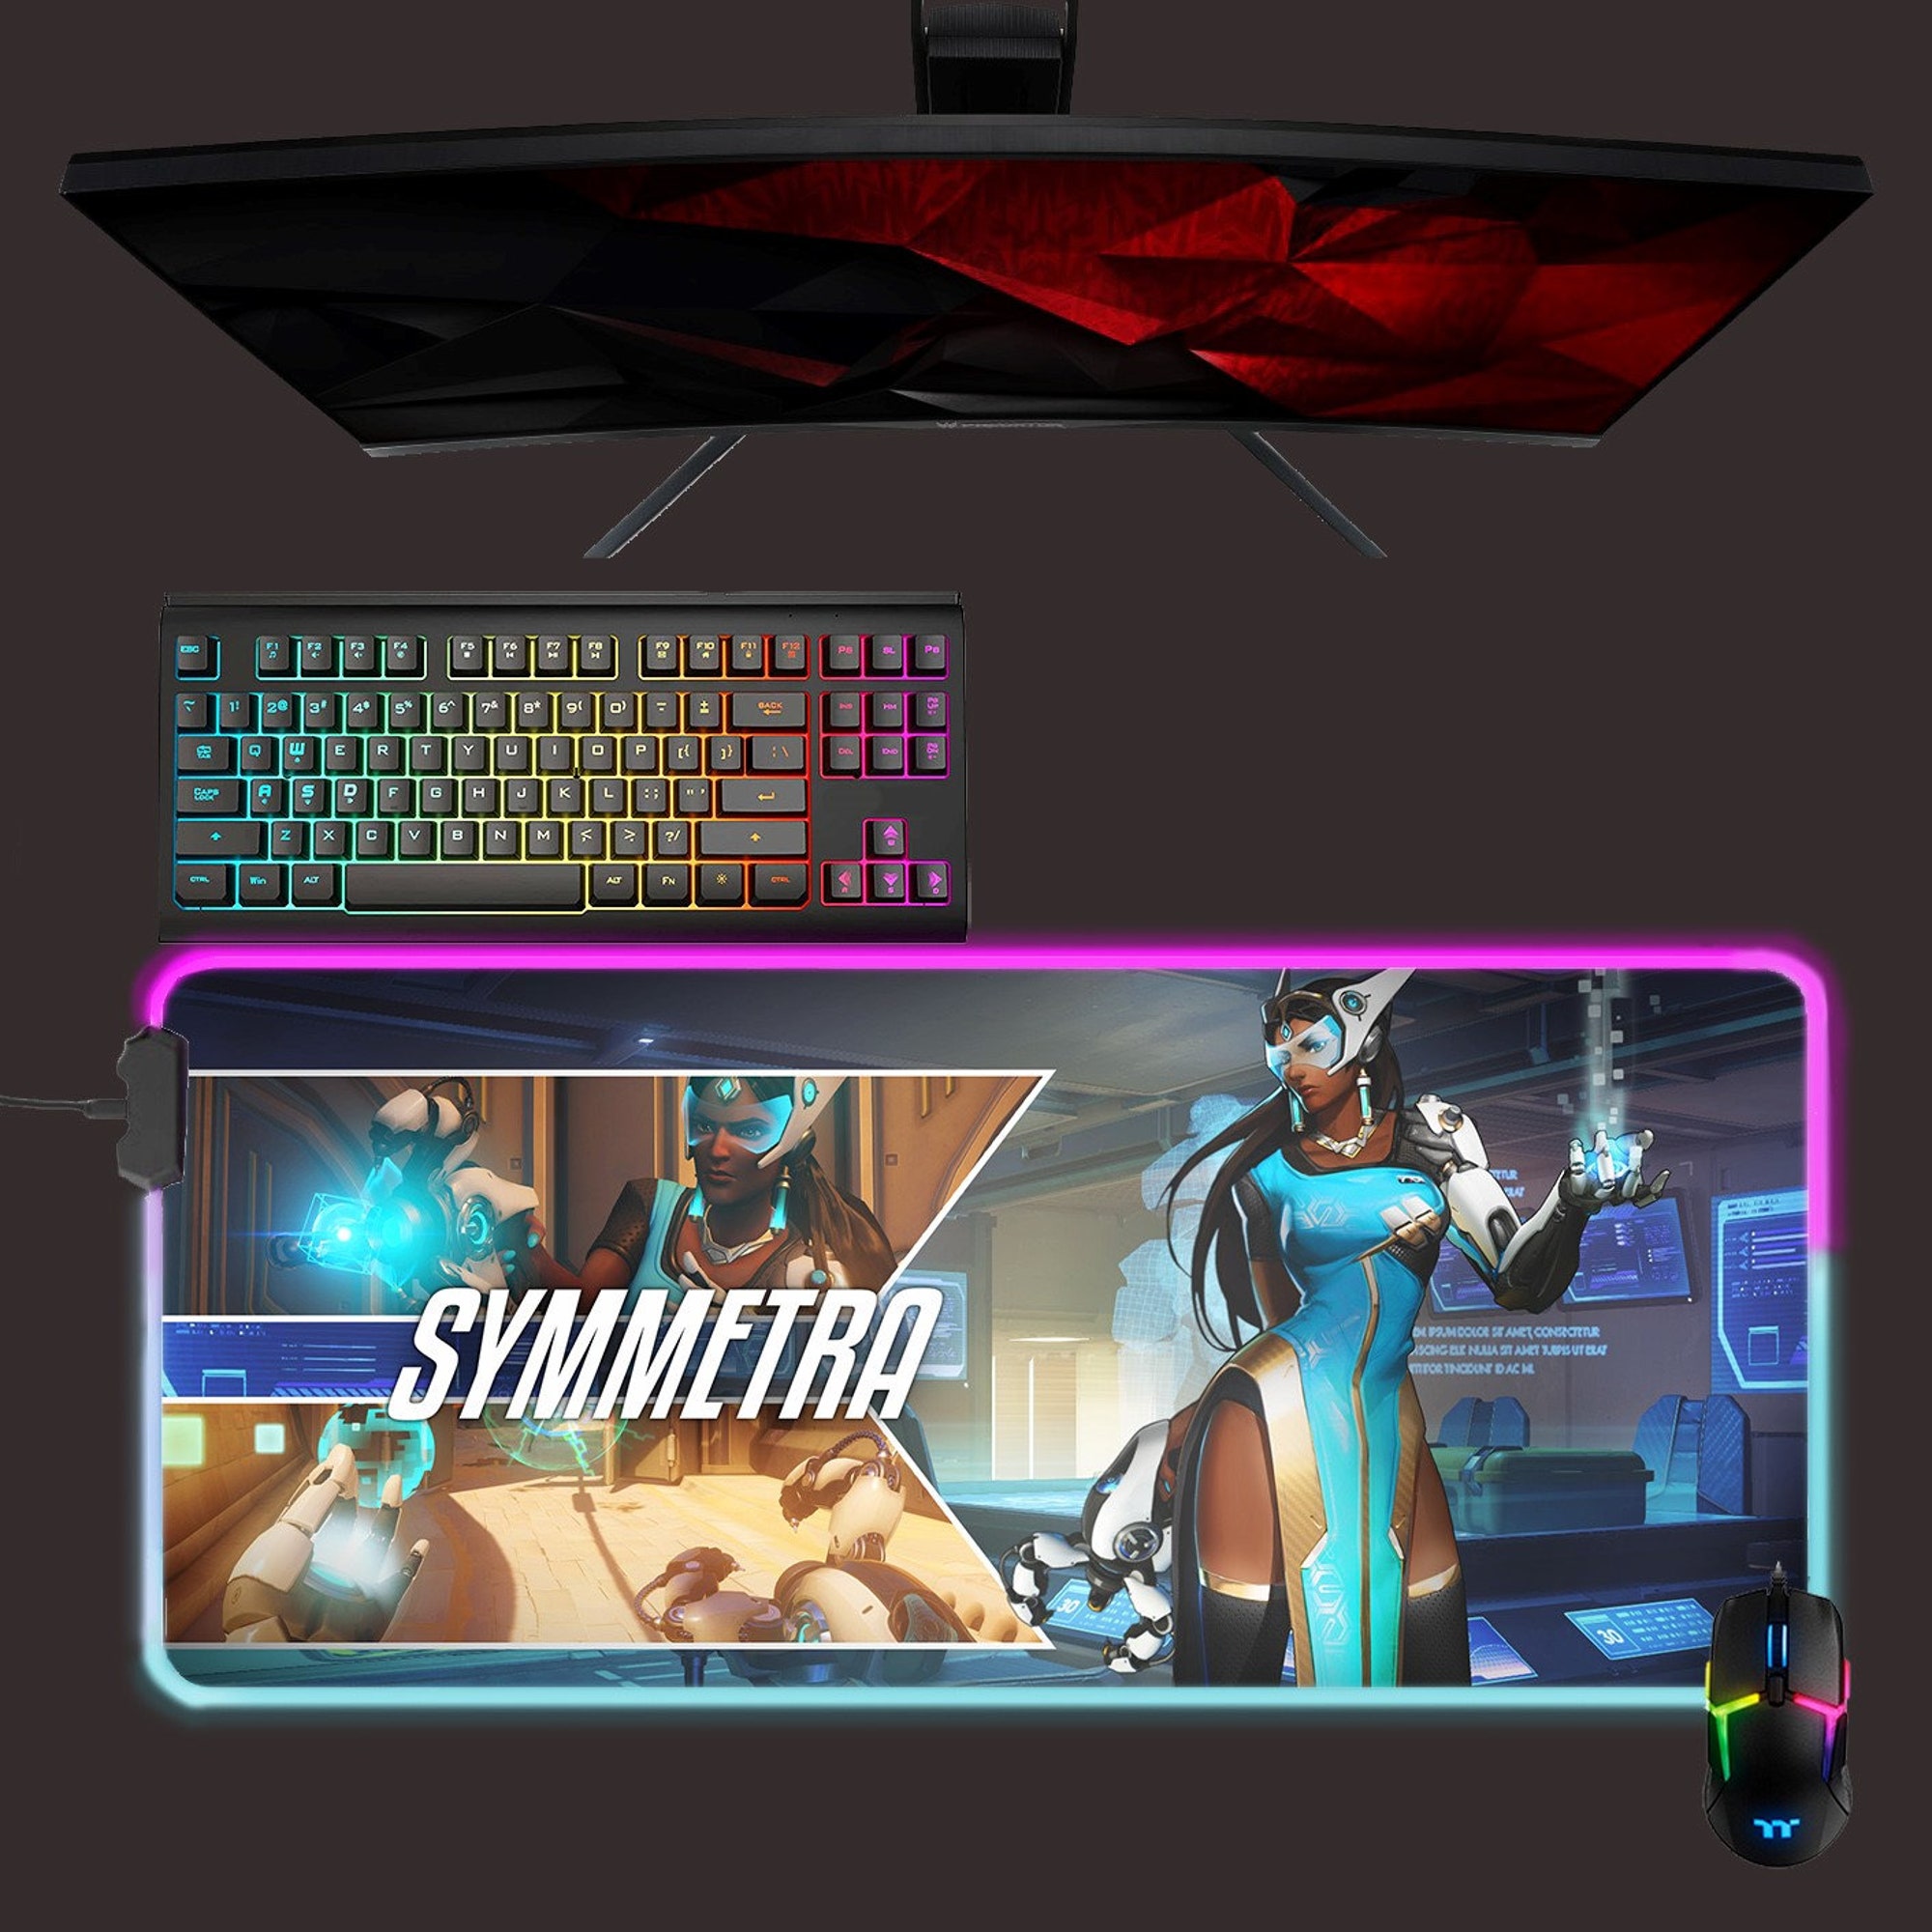 Overwatch led mouse mat, Symmetra rgb mouse pad, gaming mouse pad